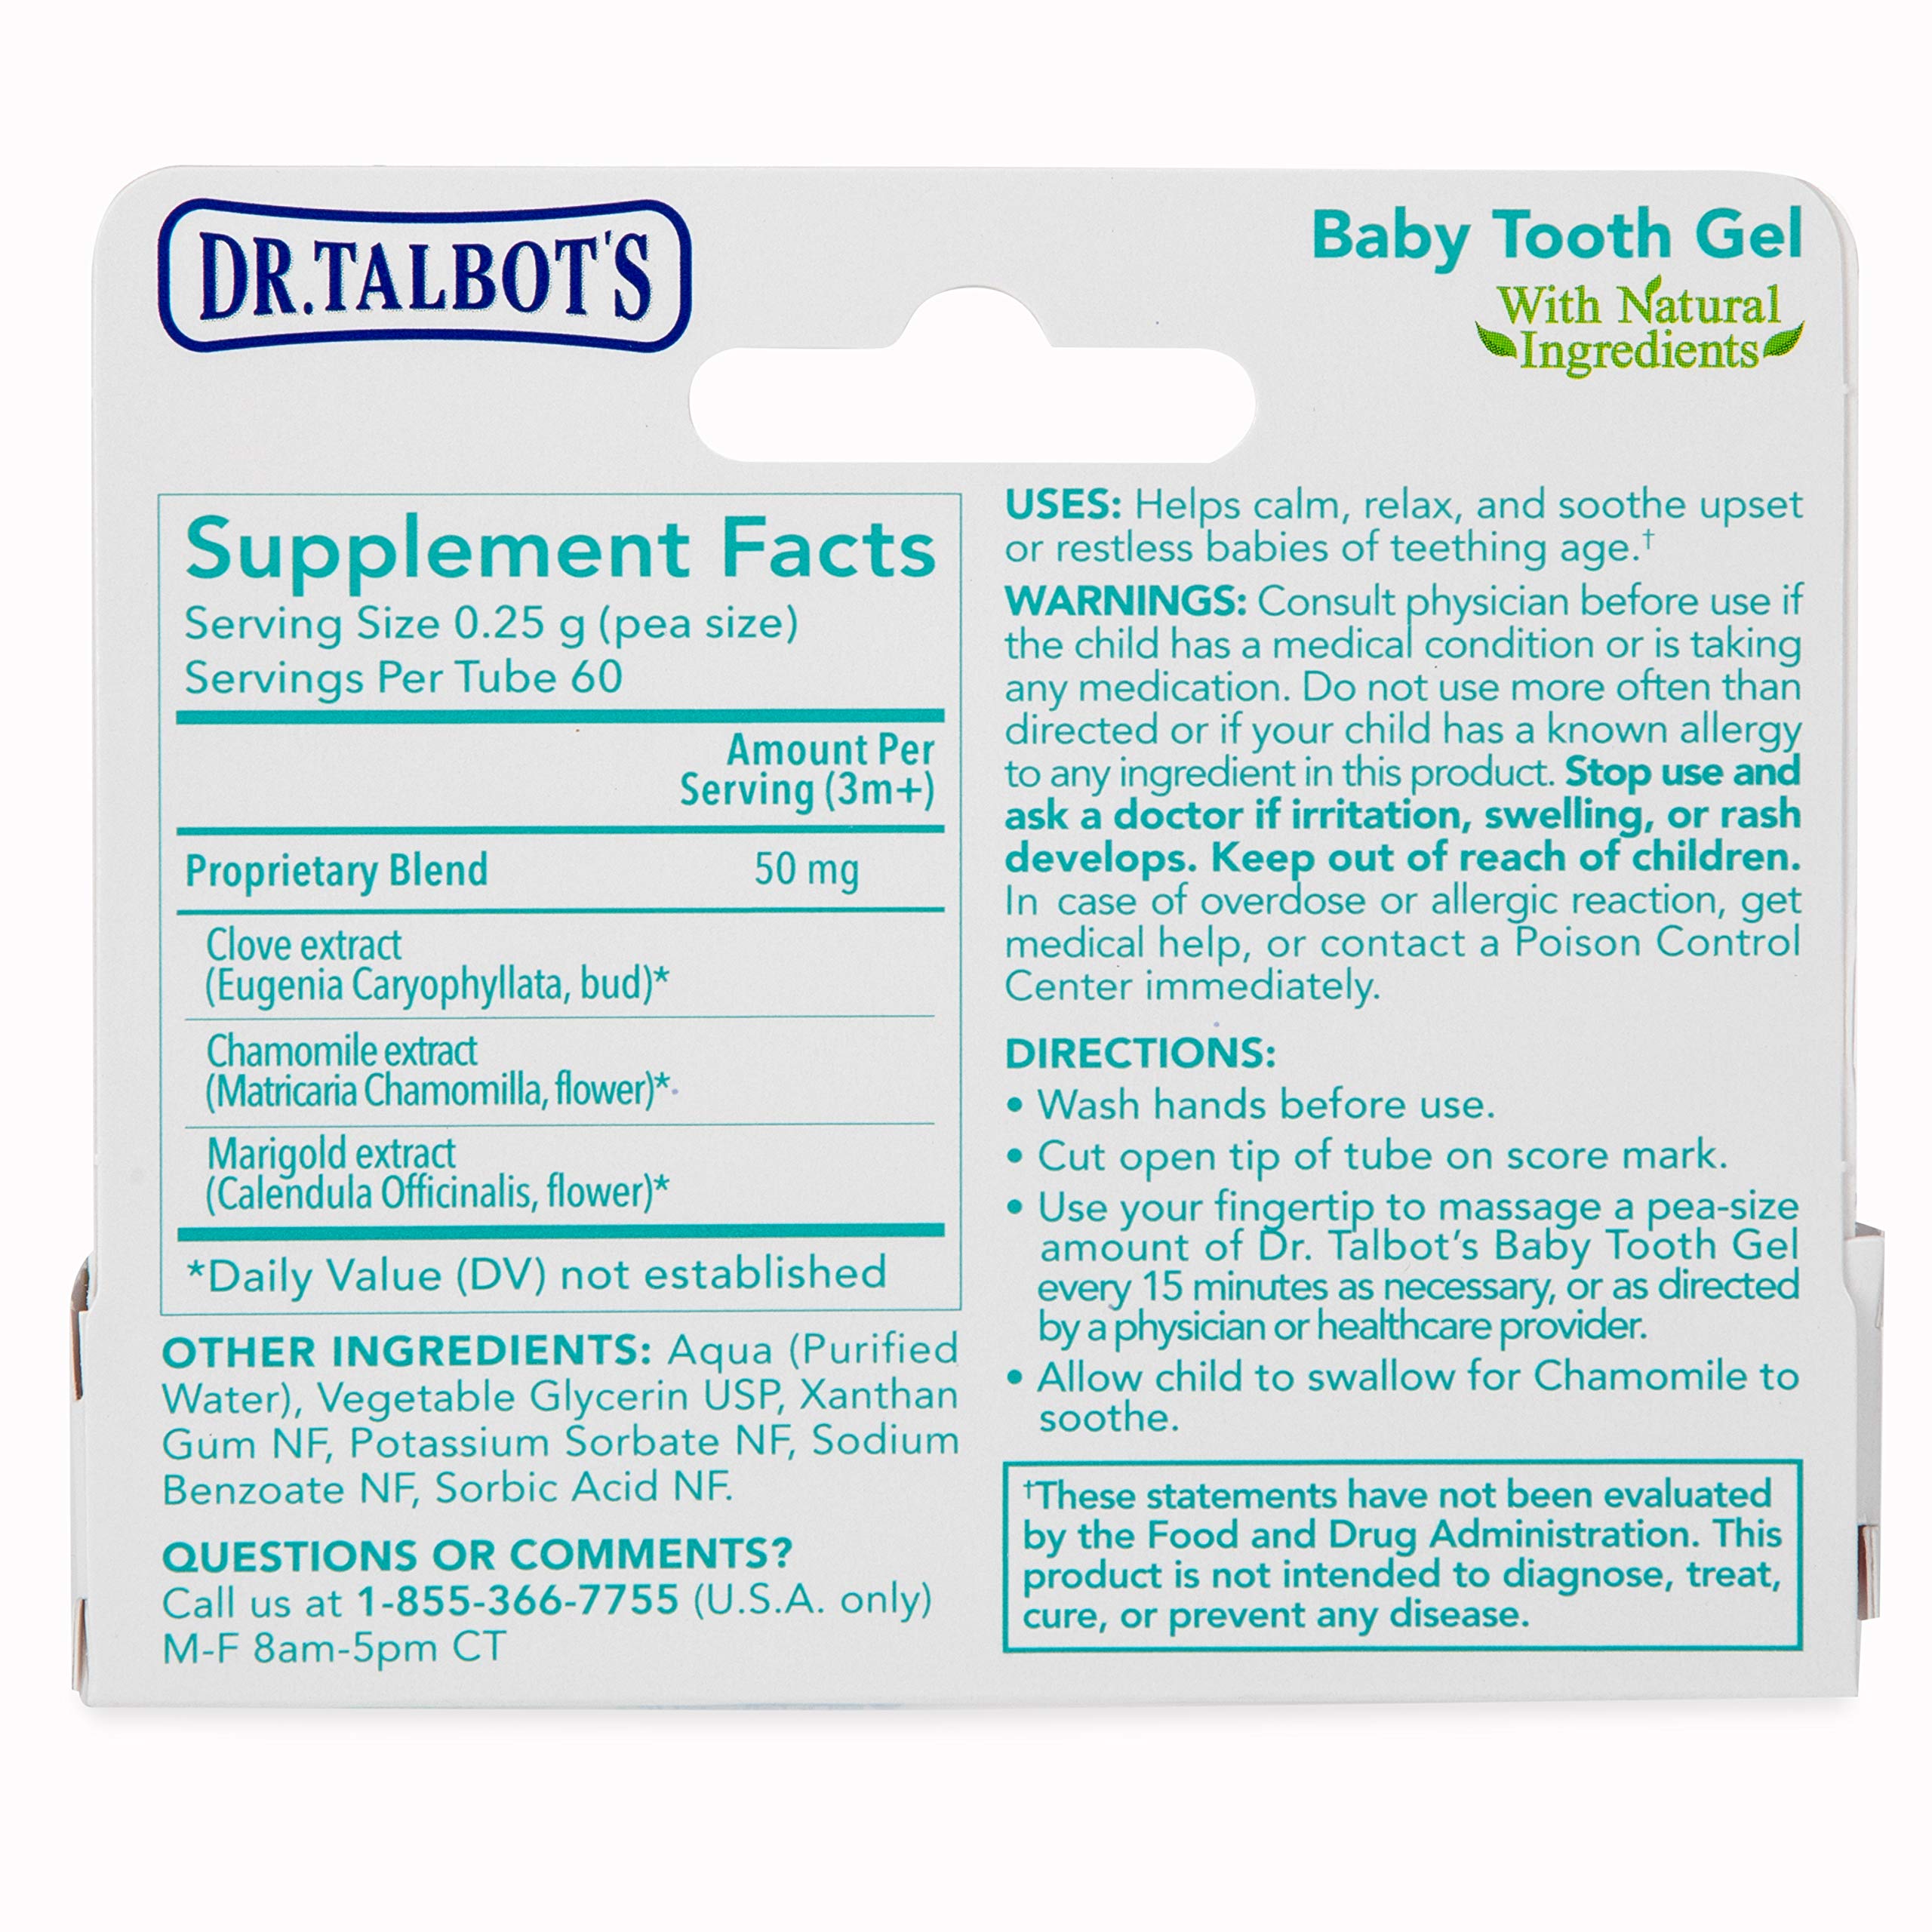 Nuby by Dr. Talbot's Baby Tooth Gel for Sore Gums, Naturally Inspired, Benzocaine Free, Belladonna